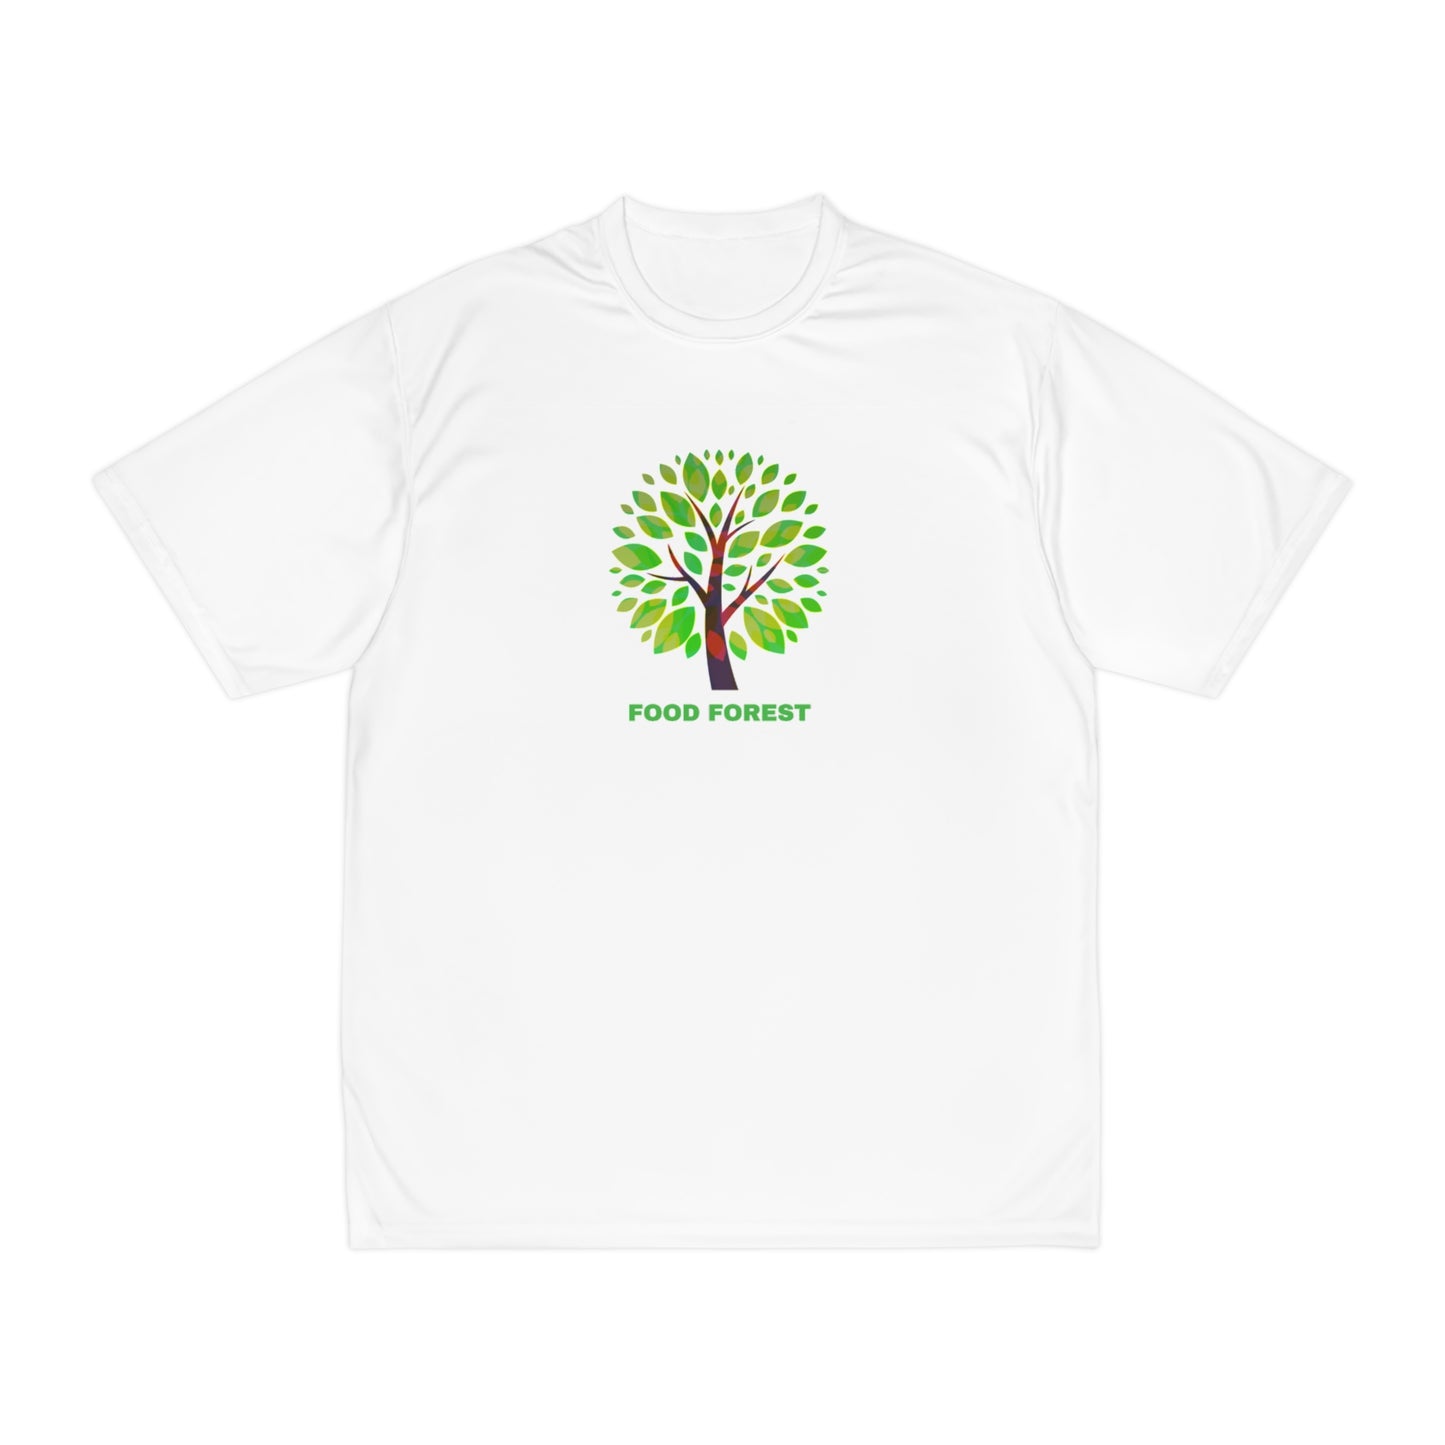 FOOD FOREST Men's Performance T-Shirt